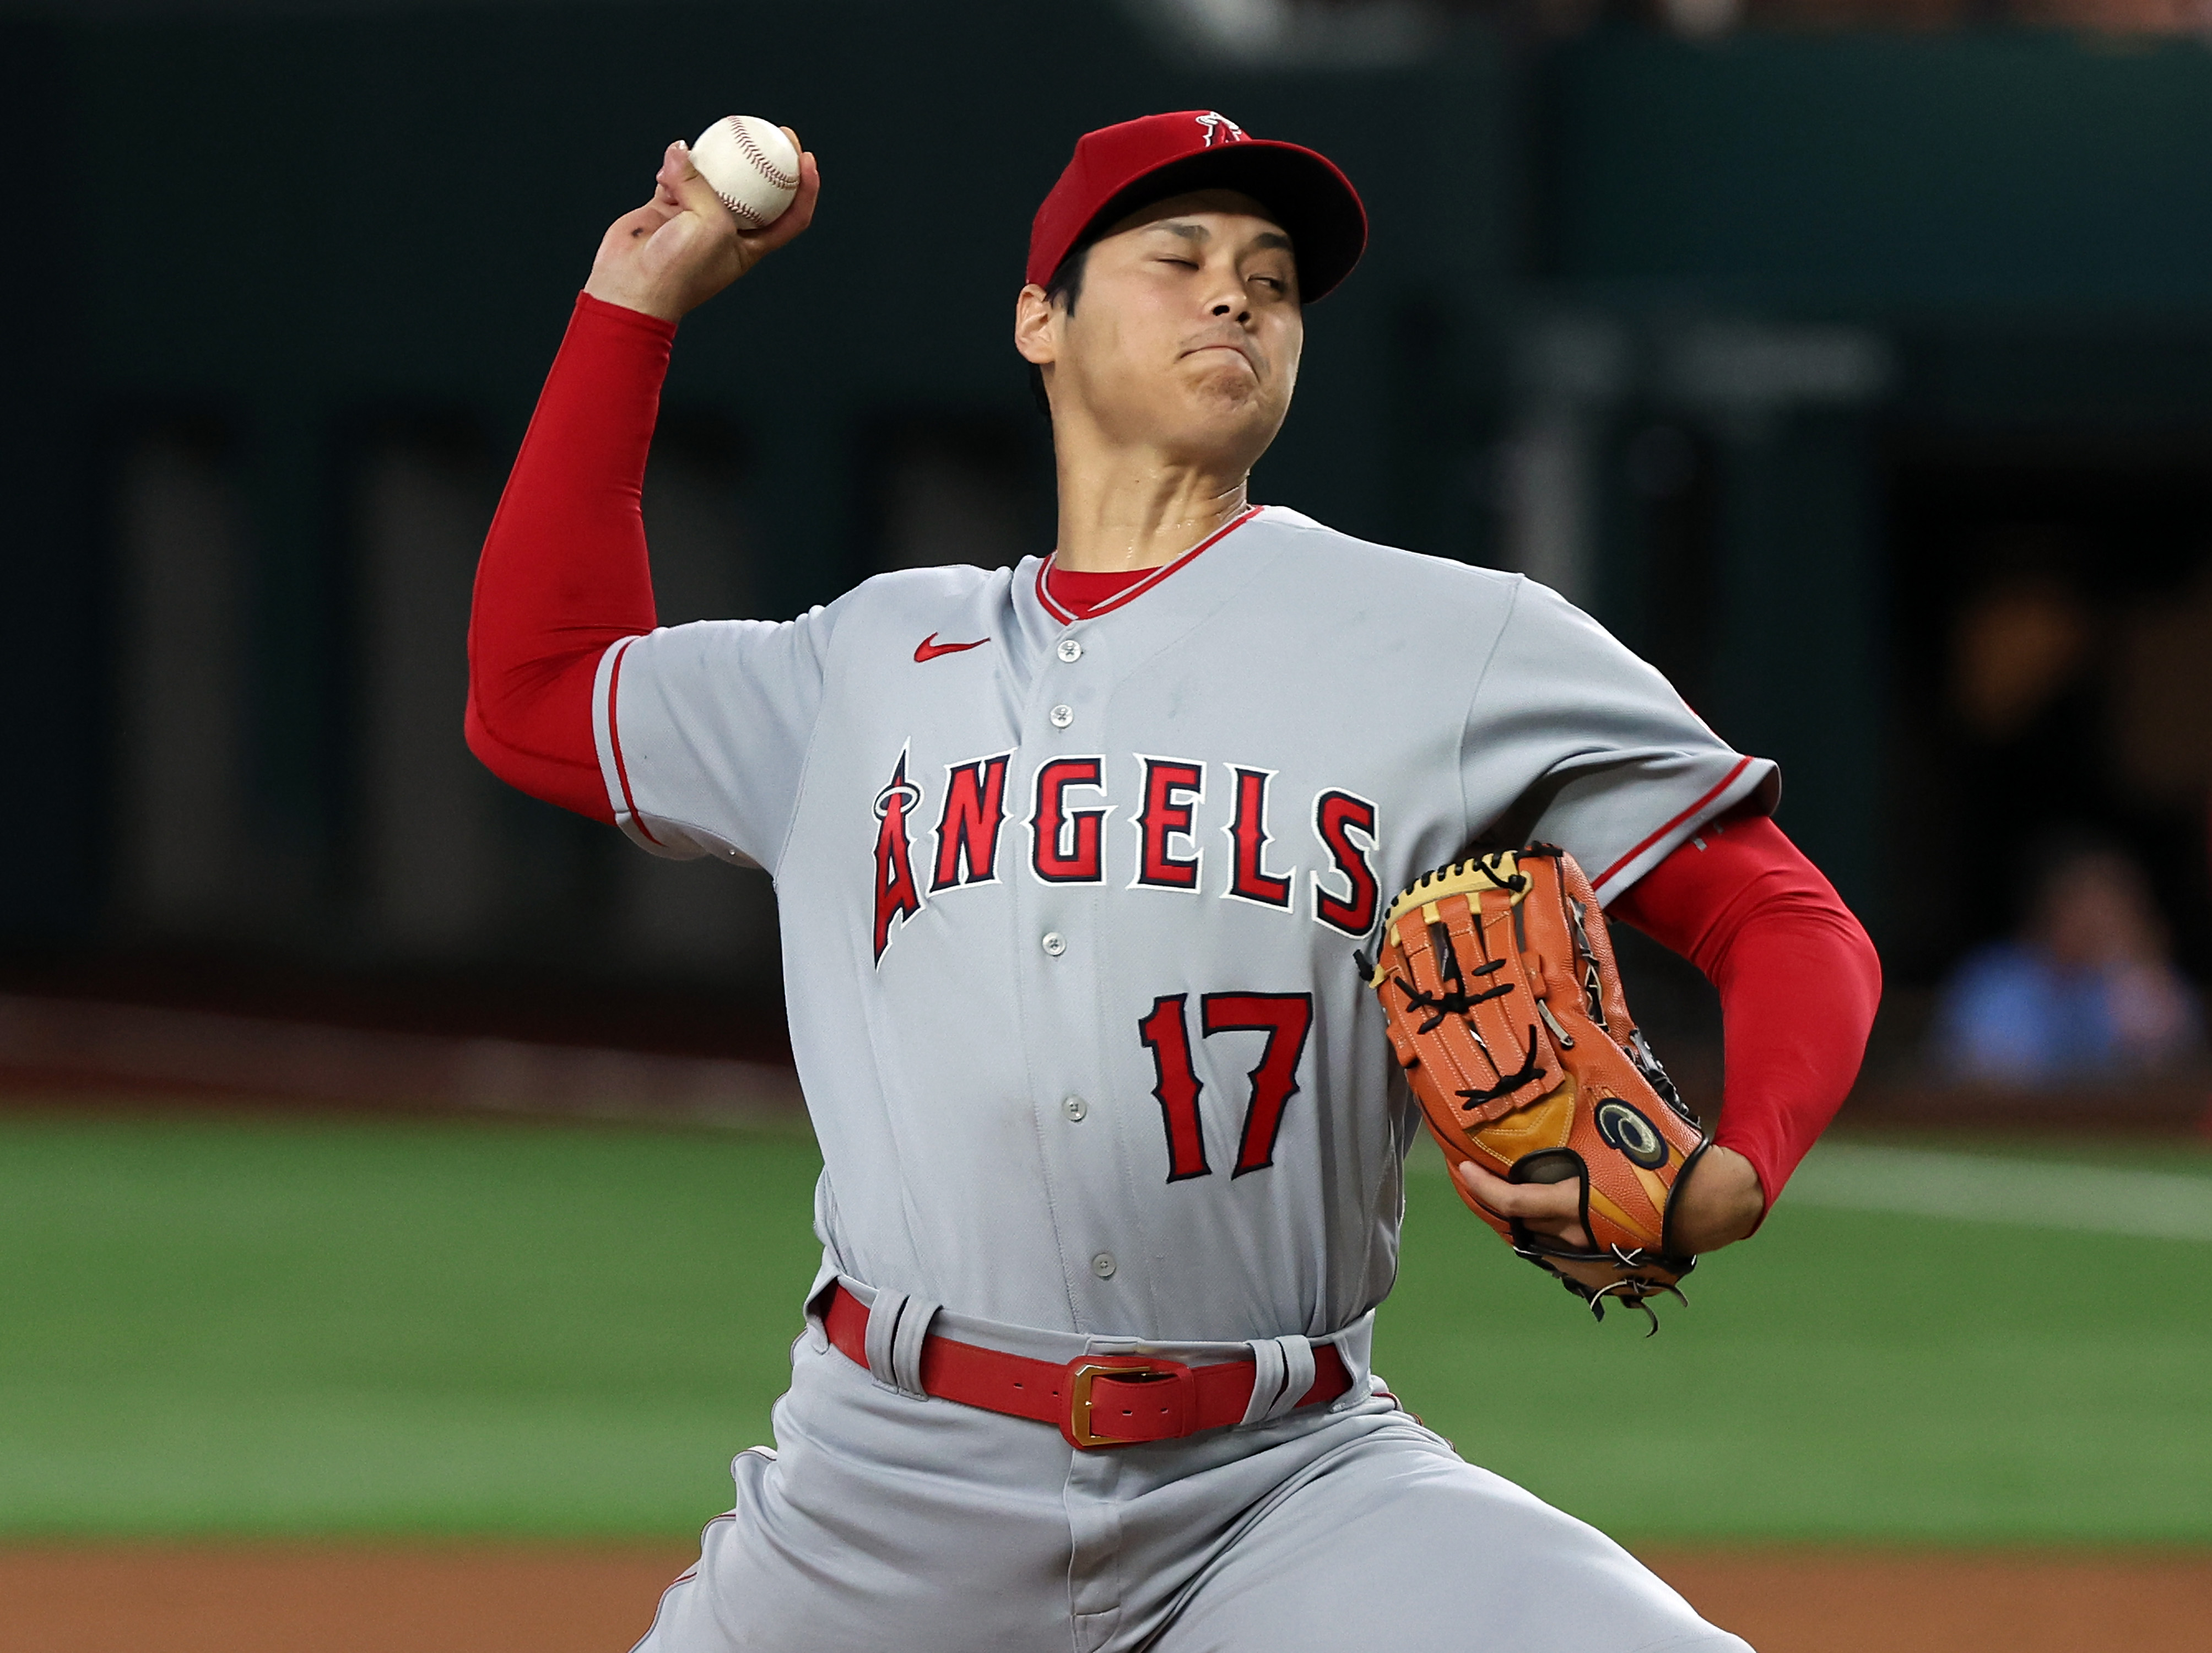 Shohei Ohtani #17 of the Los Angeles Angels pitches against the Texas Rangers at Globe Life Field on May 18, 2022 in Arlington, Texas.